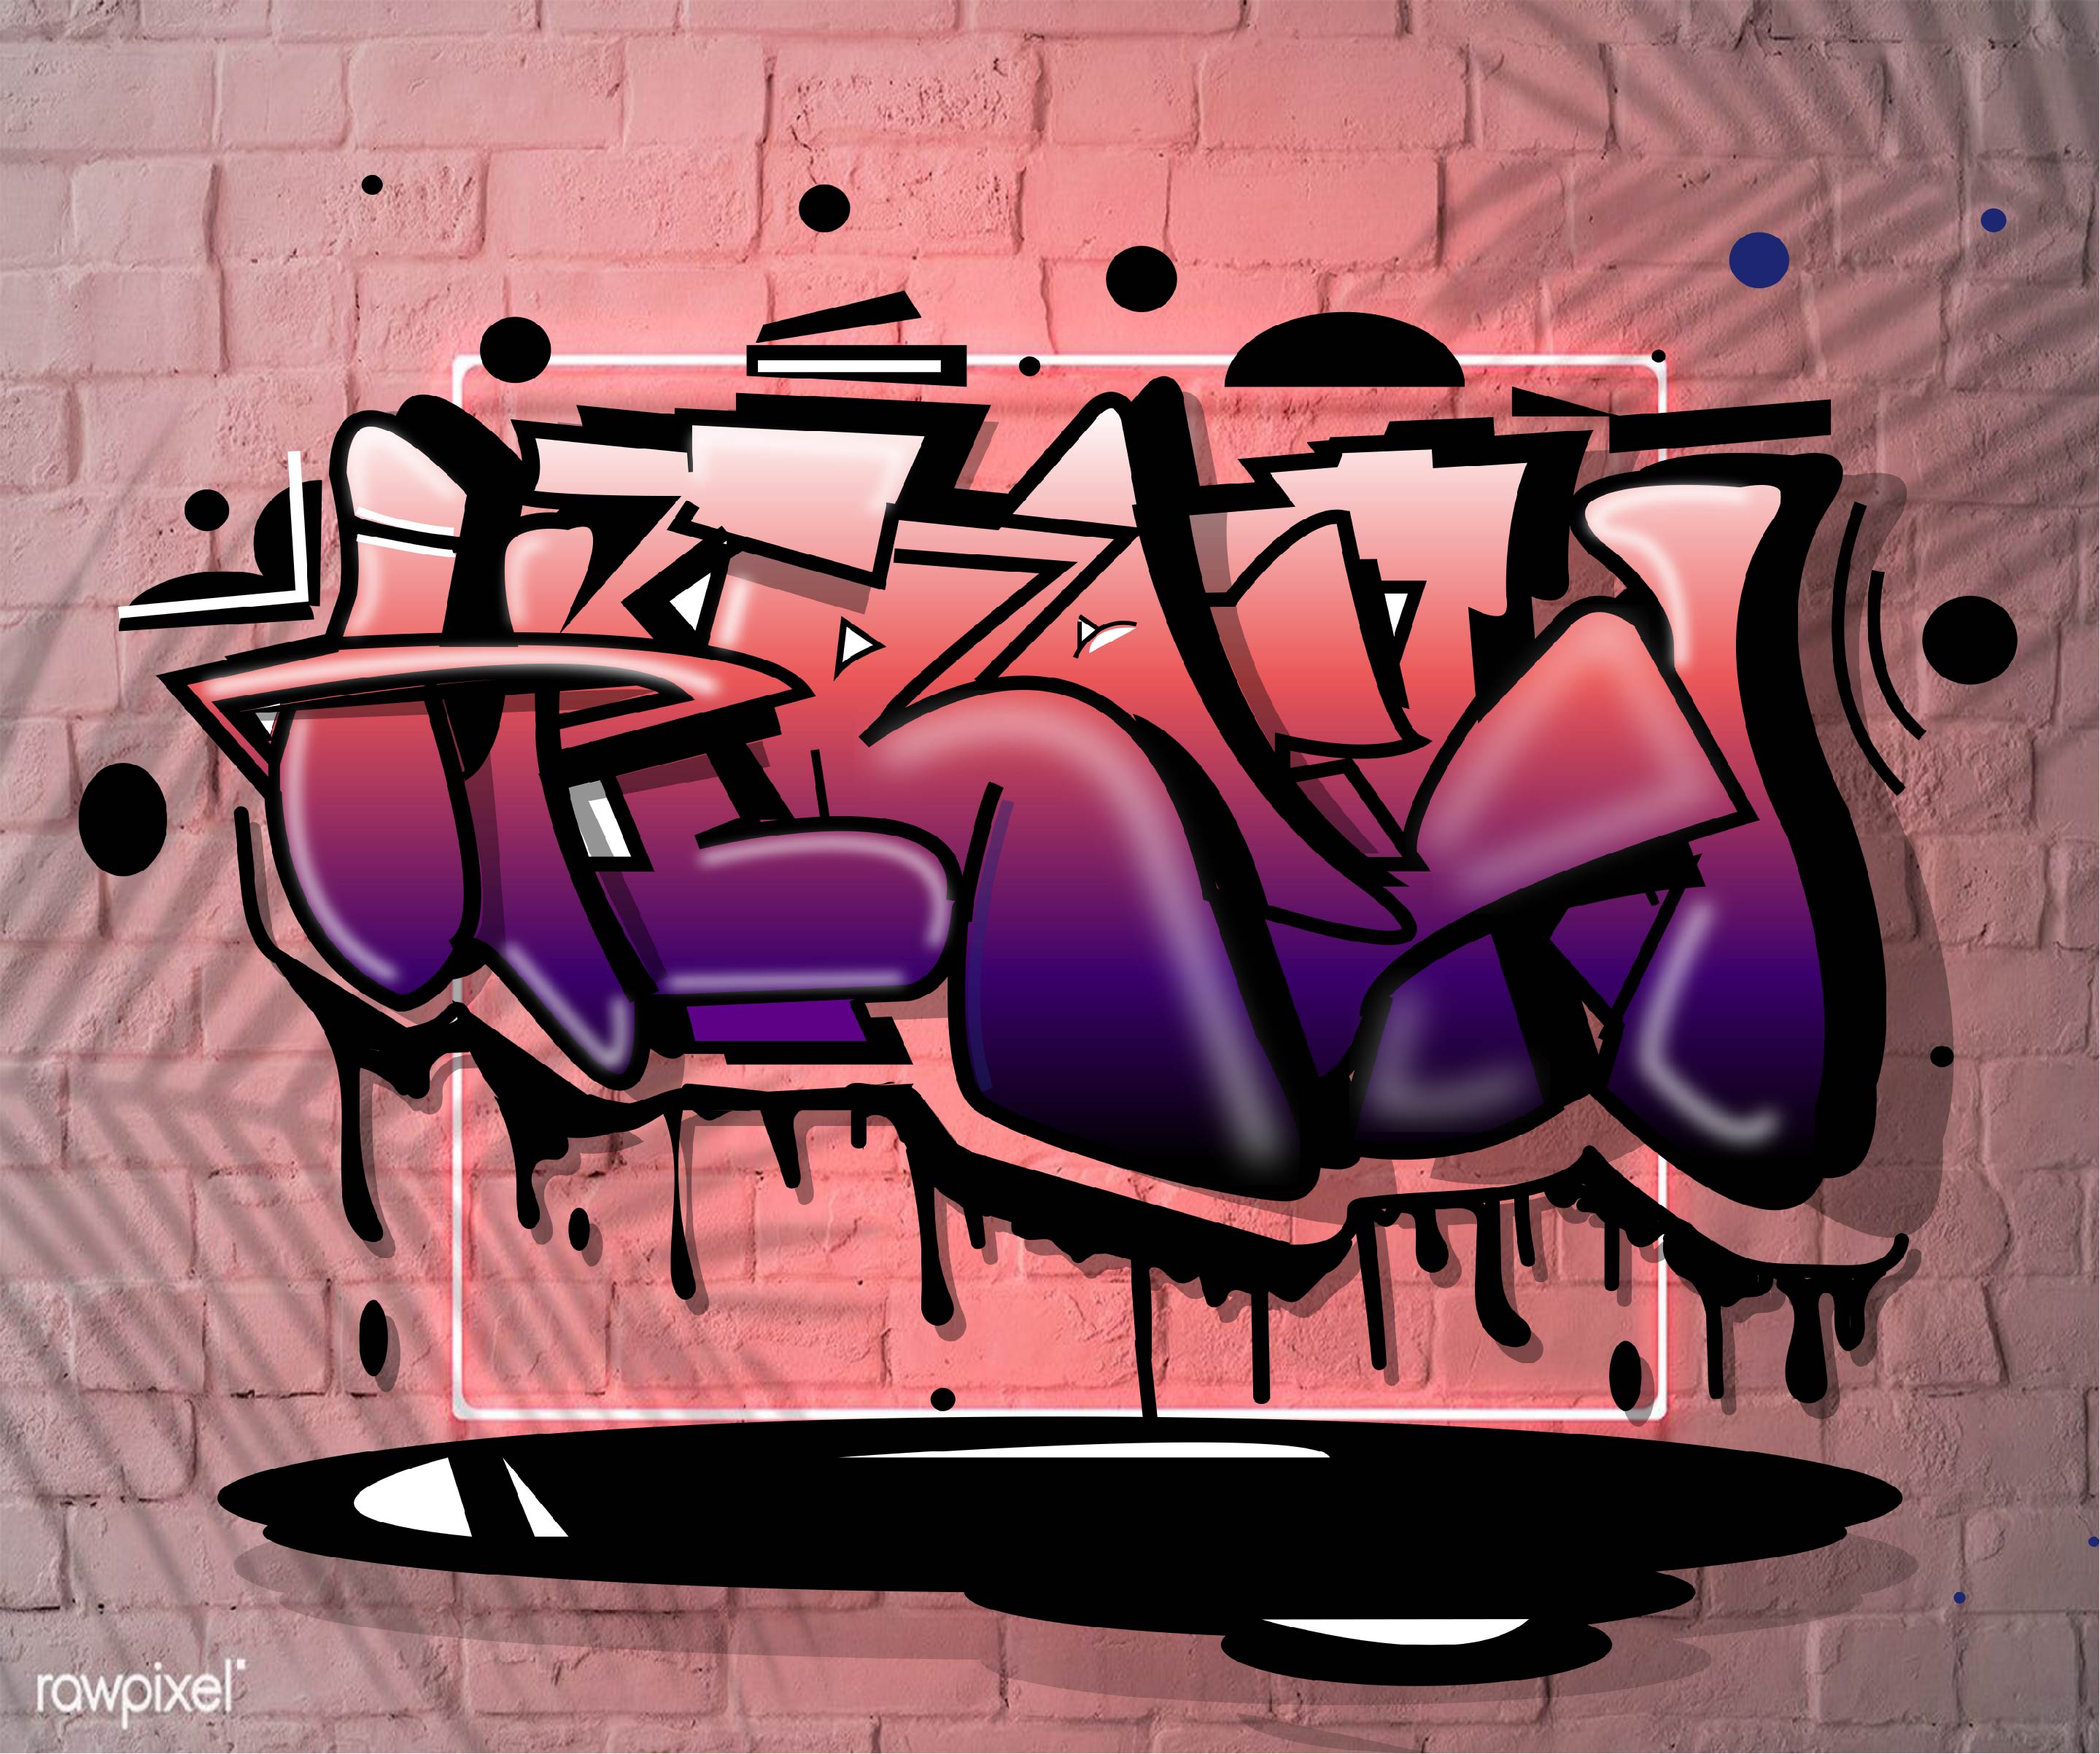 Design Awesome Graffiti Name Logo Or Words By Amira7nppp Fiverr